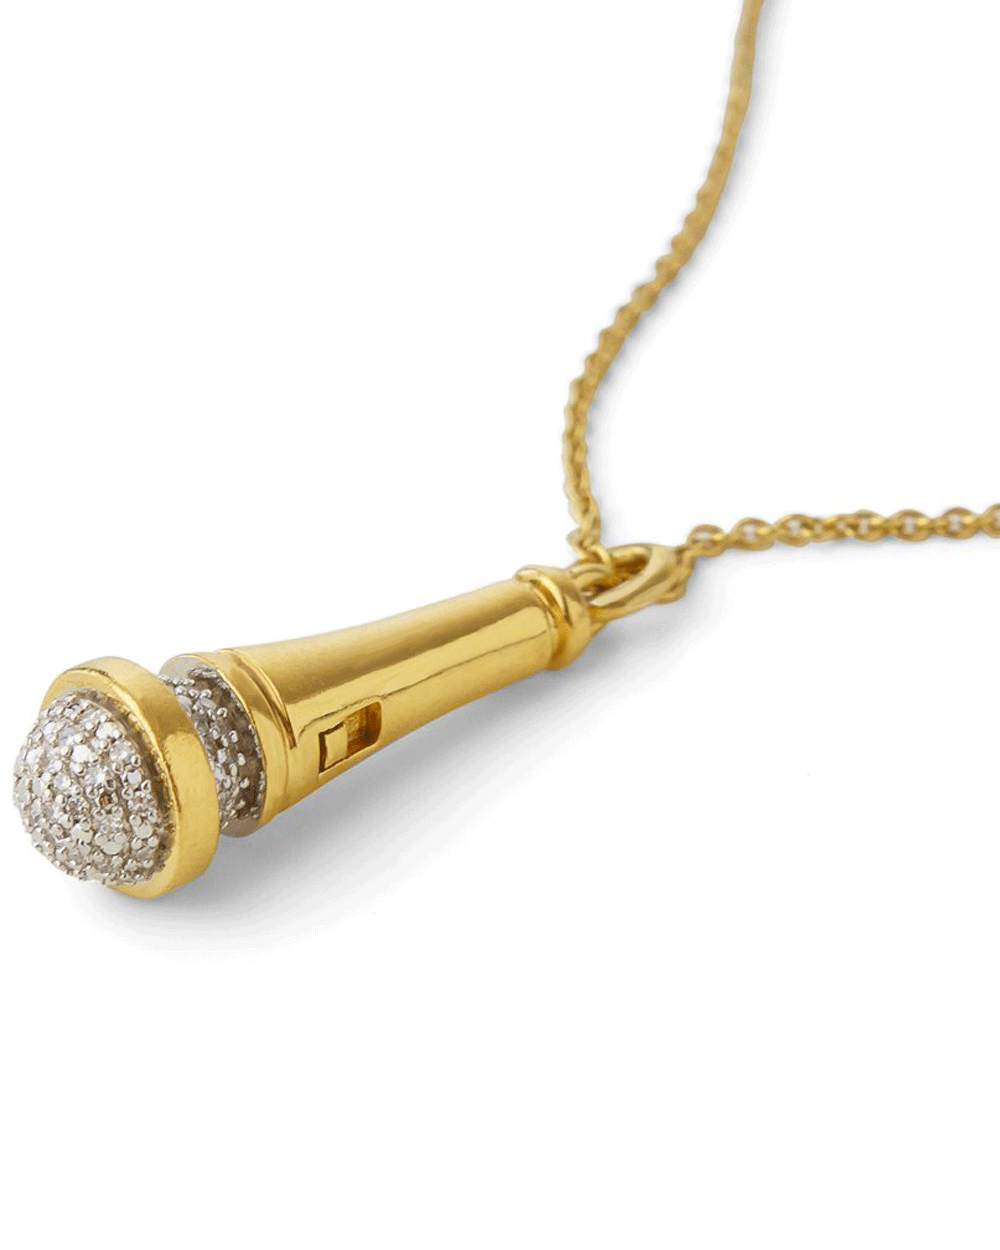 Gold Vermeil and Sterling Silver Use Your Voice Microphone Necklace